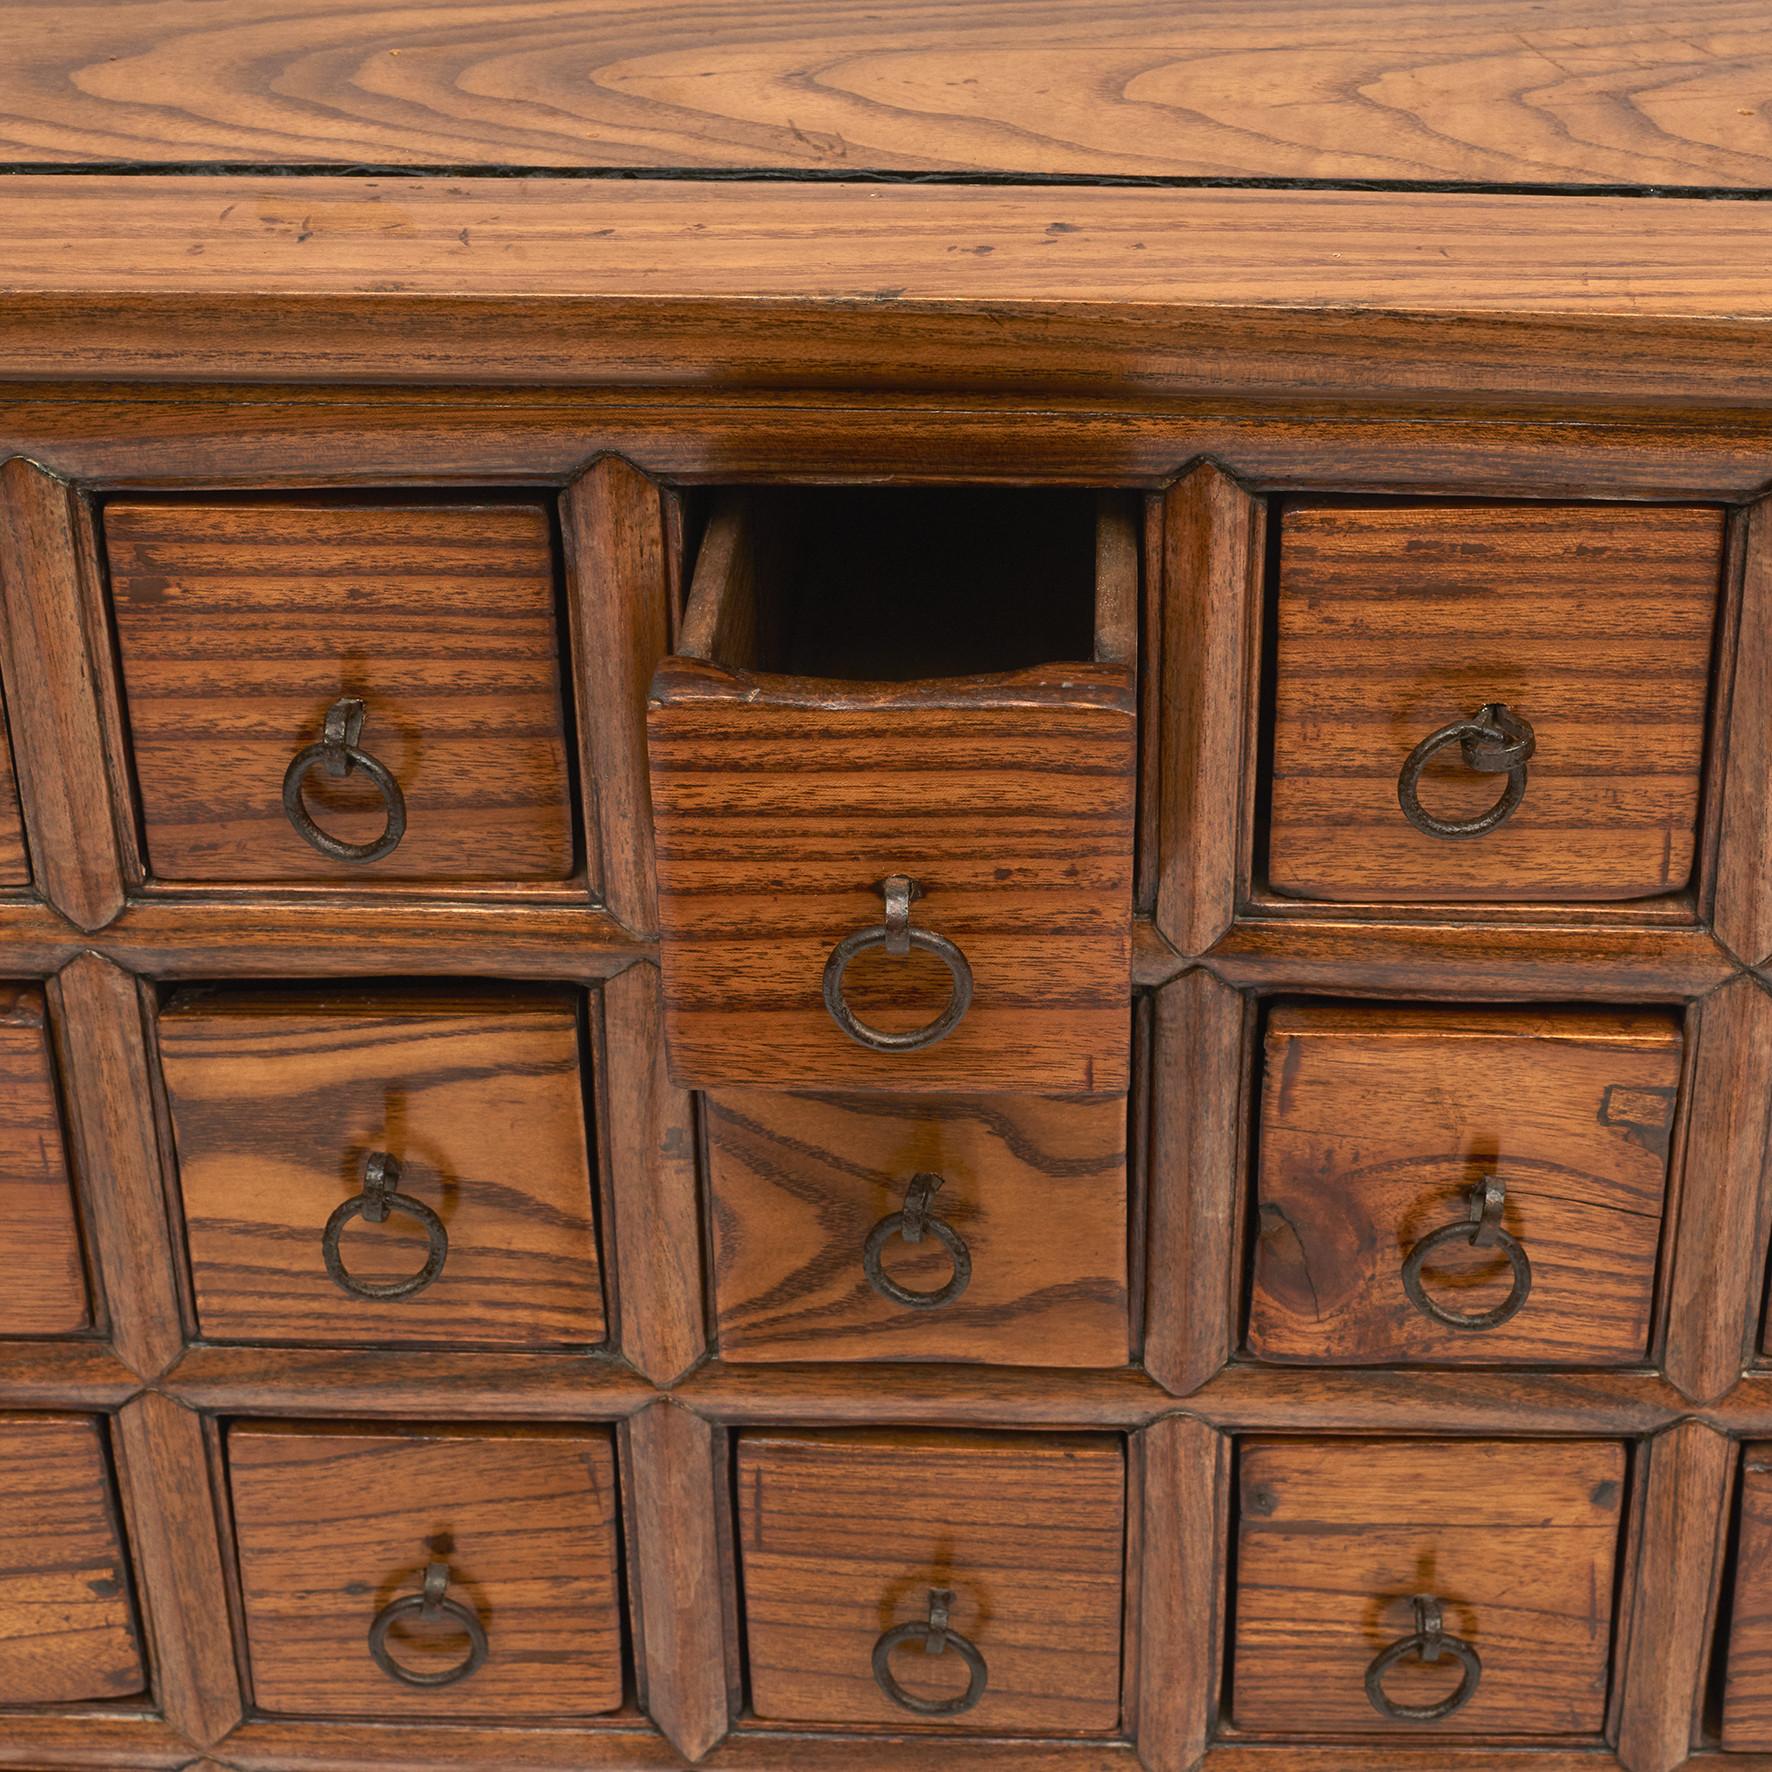 19th Century Chinese Apothecary Medicine Chest with 39 Drawers